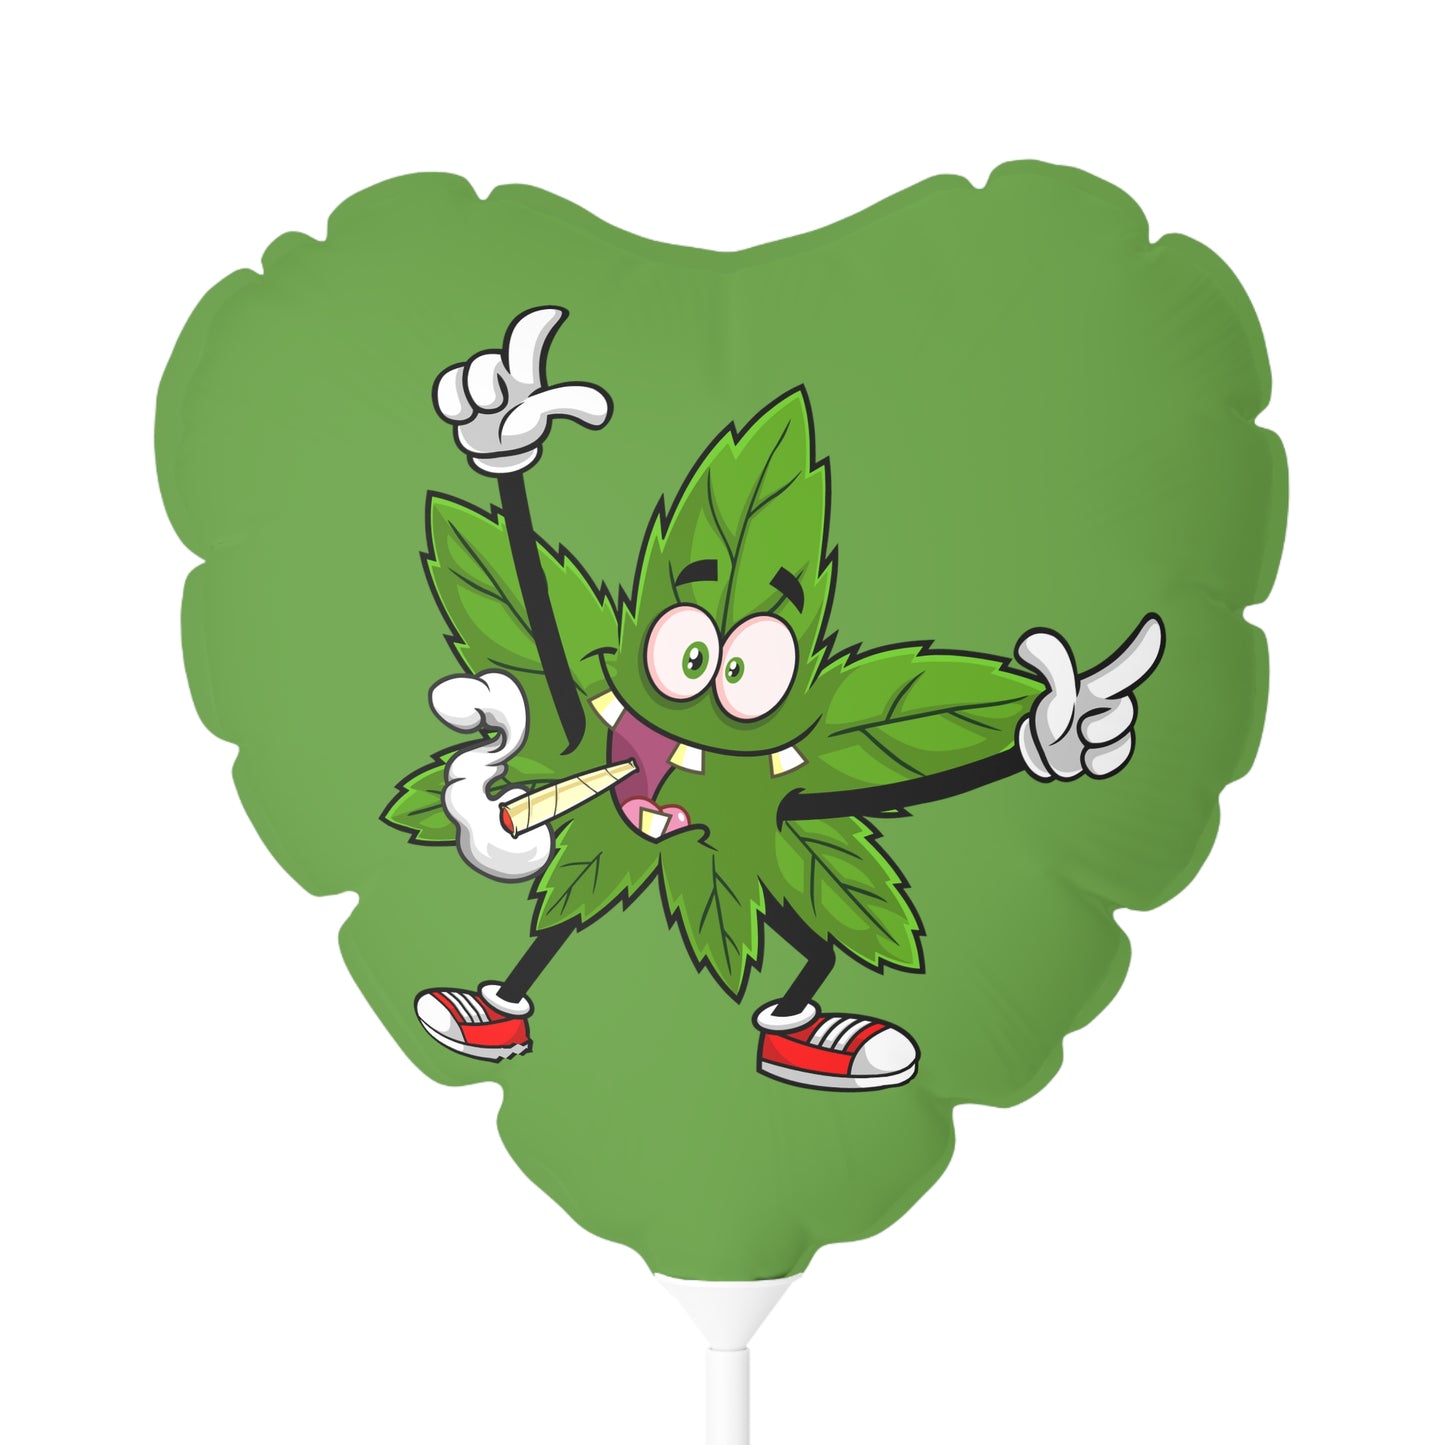 Marijuana Reggae Pot Leaf Man Smoking A Joint With Red Sneakers Style 3 , Green Balloon (Round and Heart-shaped), 11"